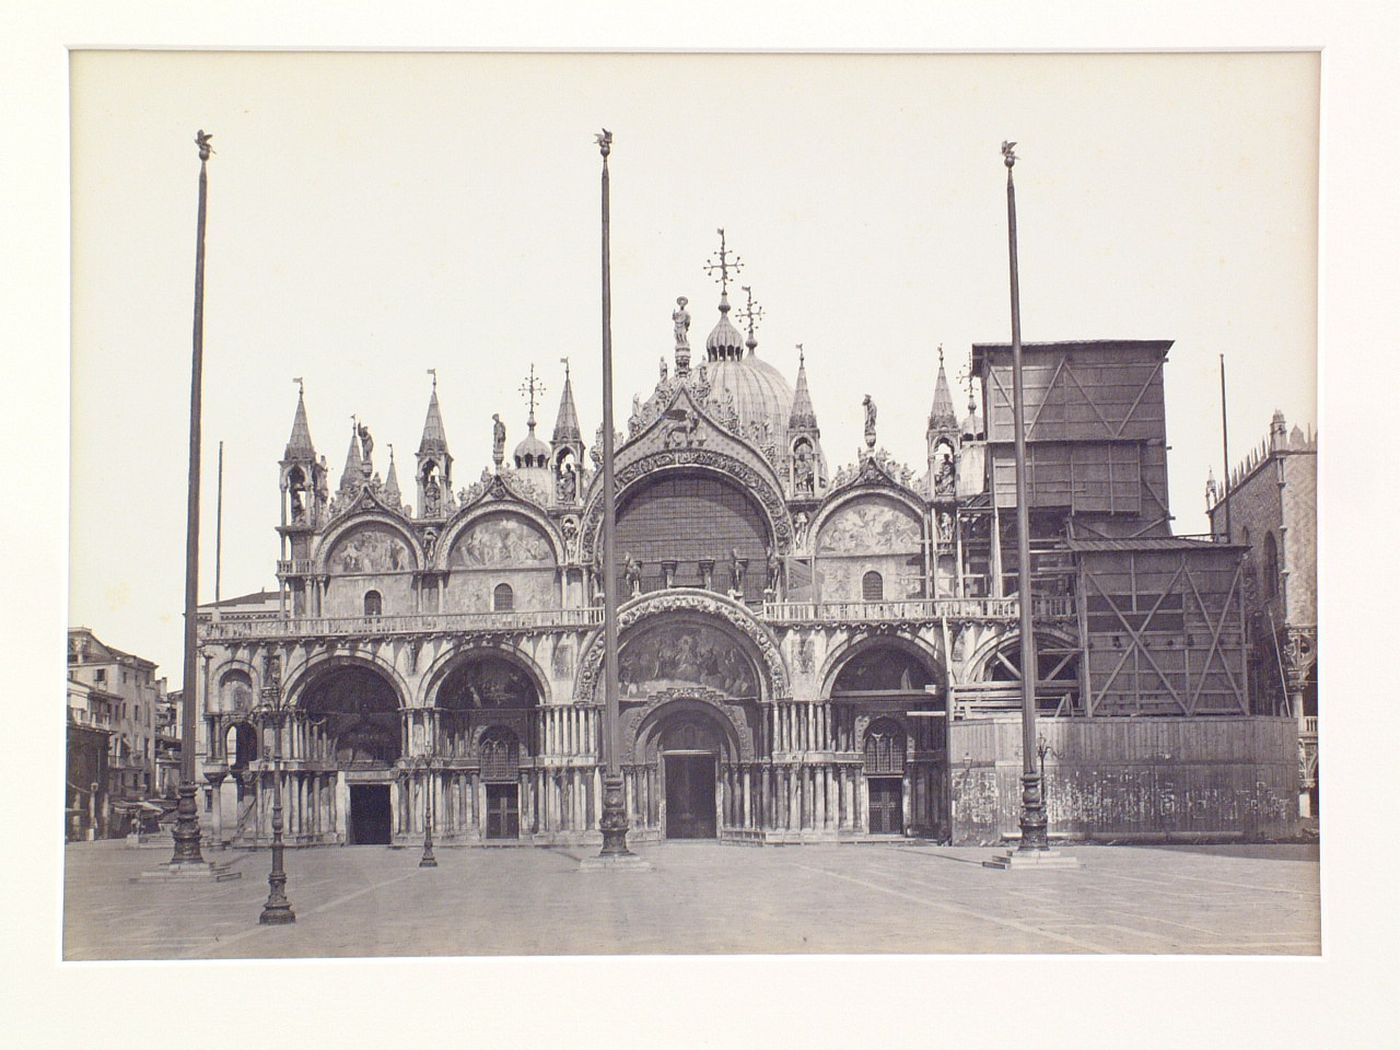 St. Mark's cathedral, façade with tower at R under repair, Venice, Italy